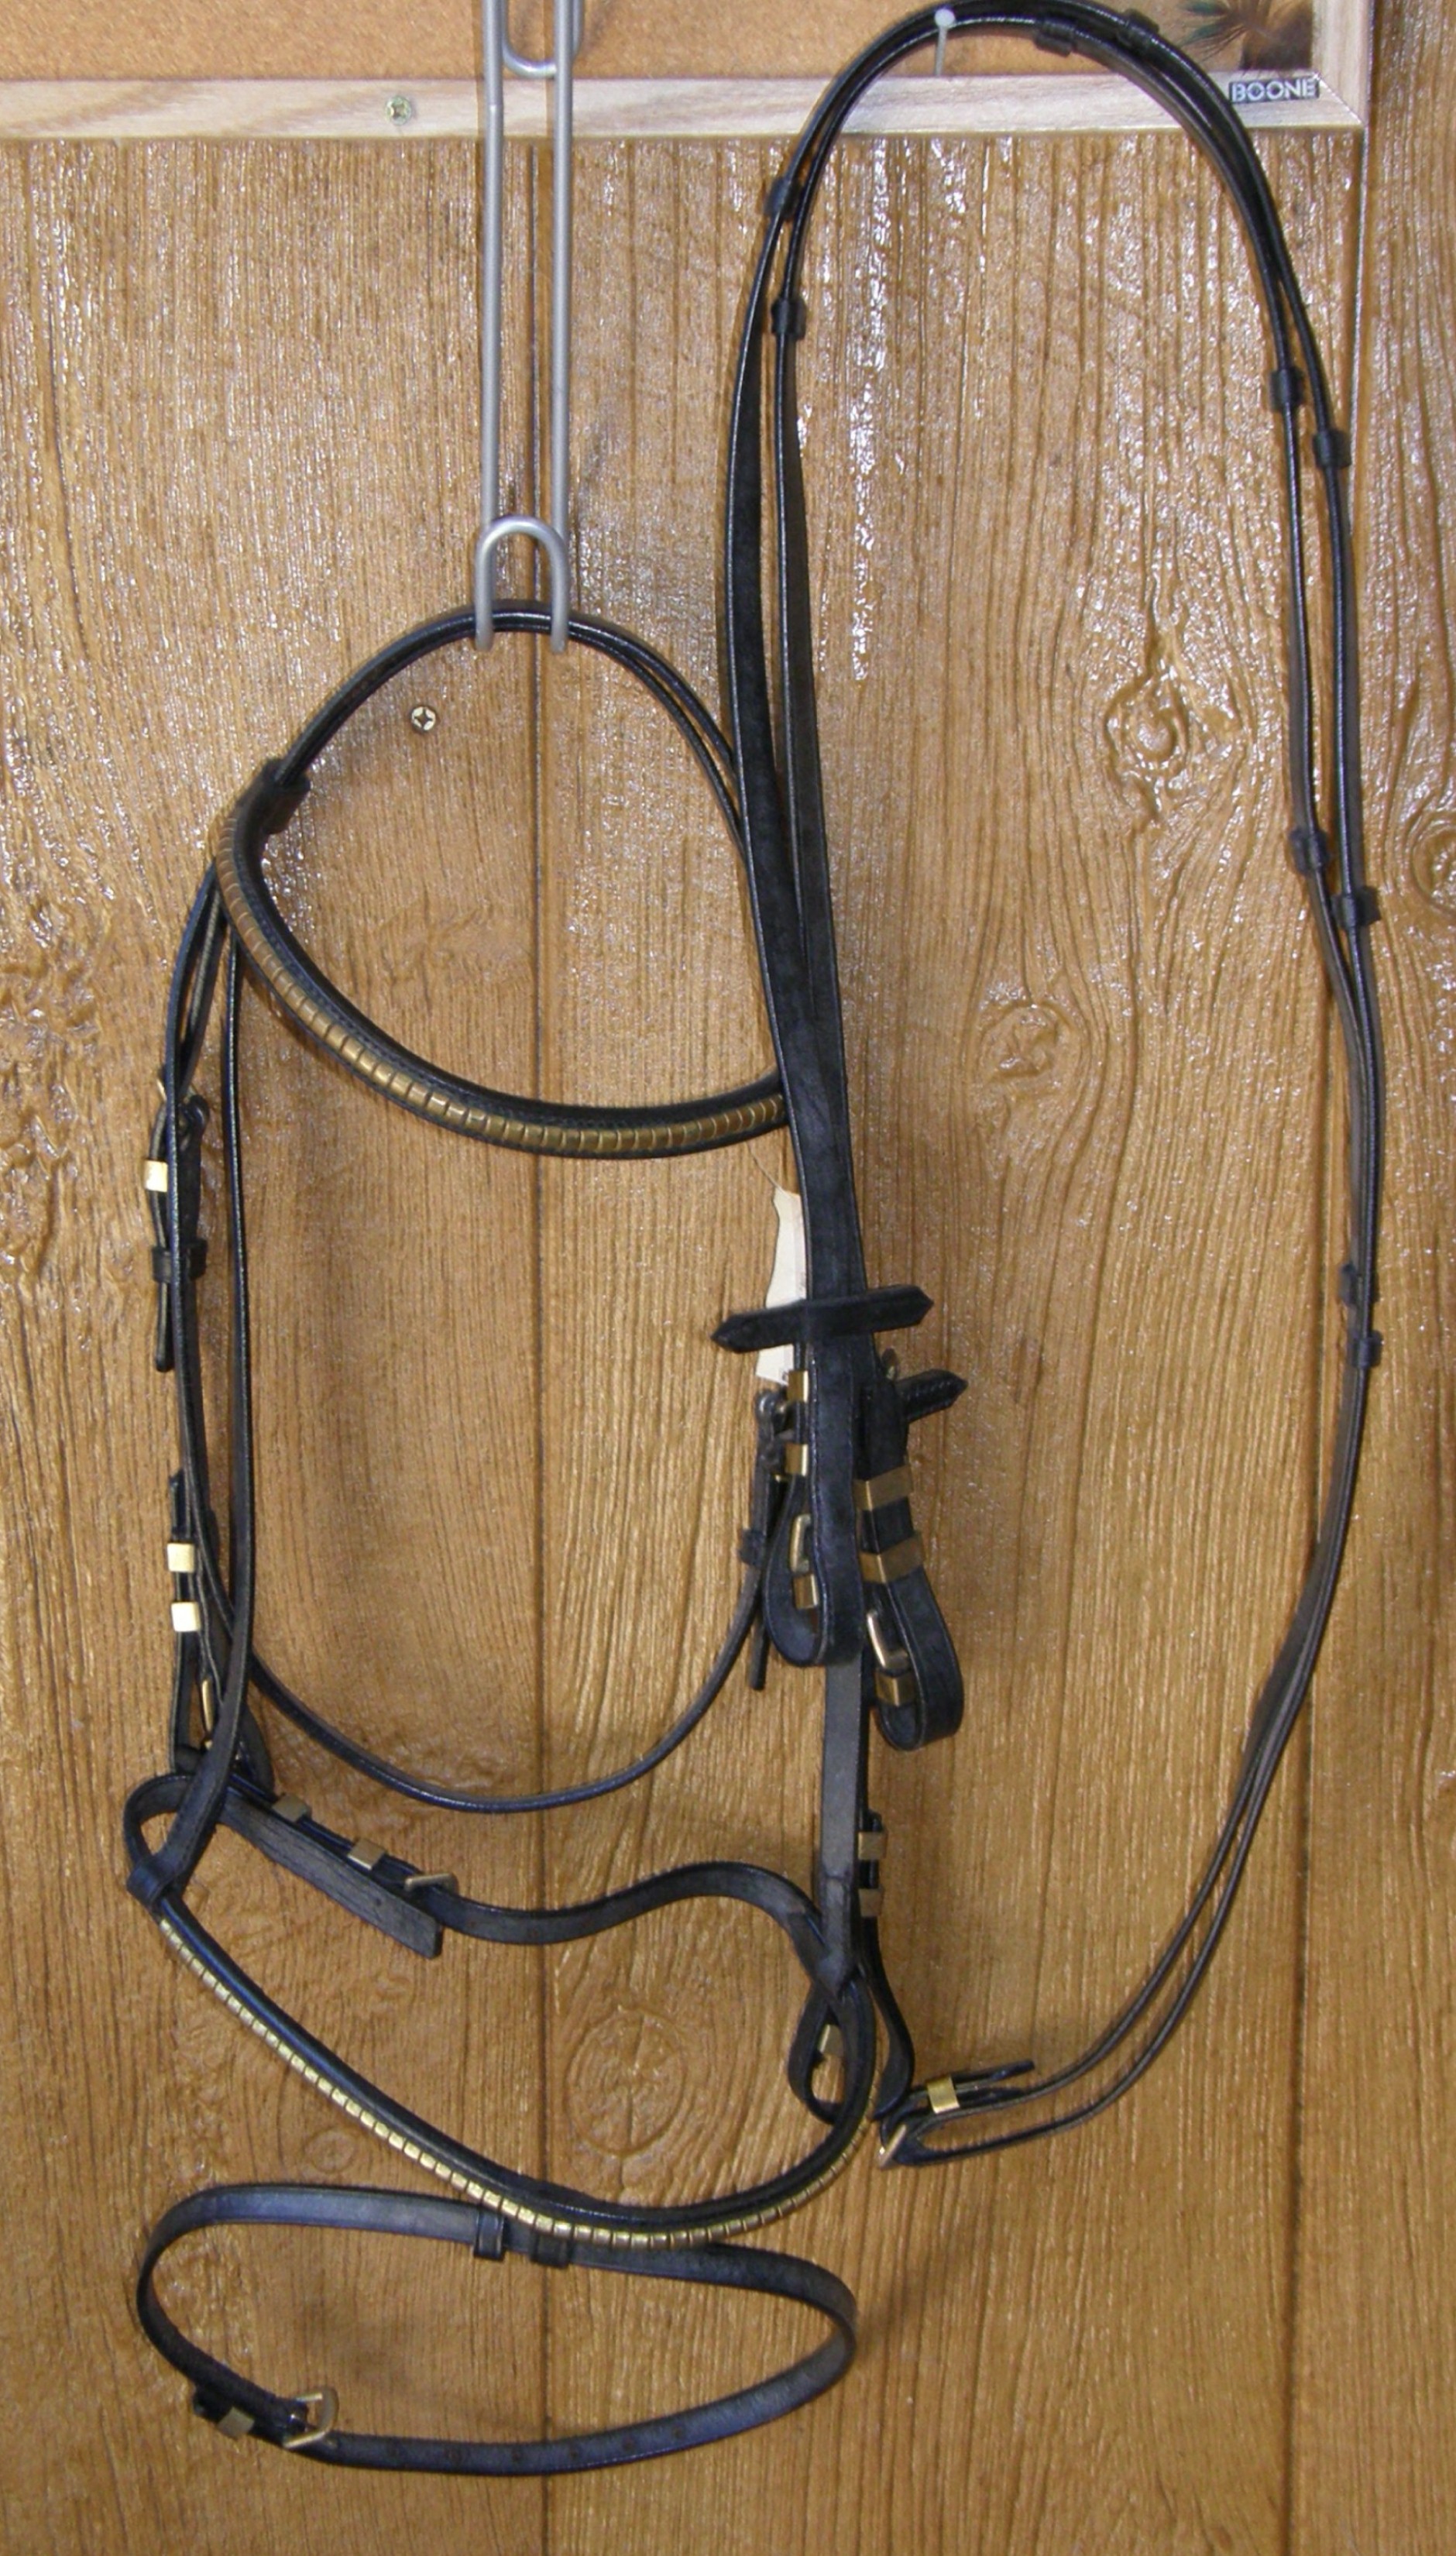 Horse Brown Black Leather English Bridle Reins Girth Saddle Irons Pad Package 